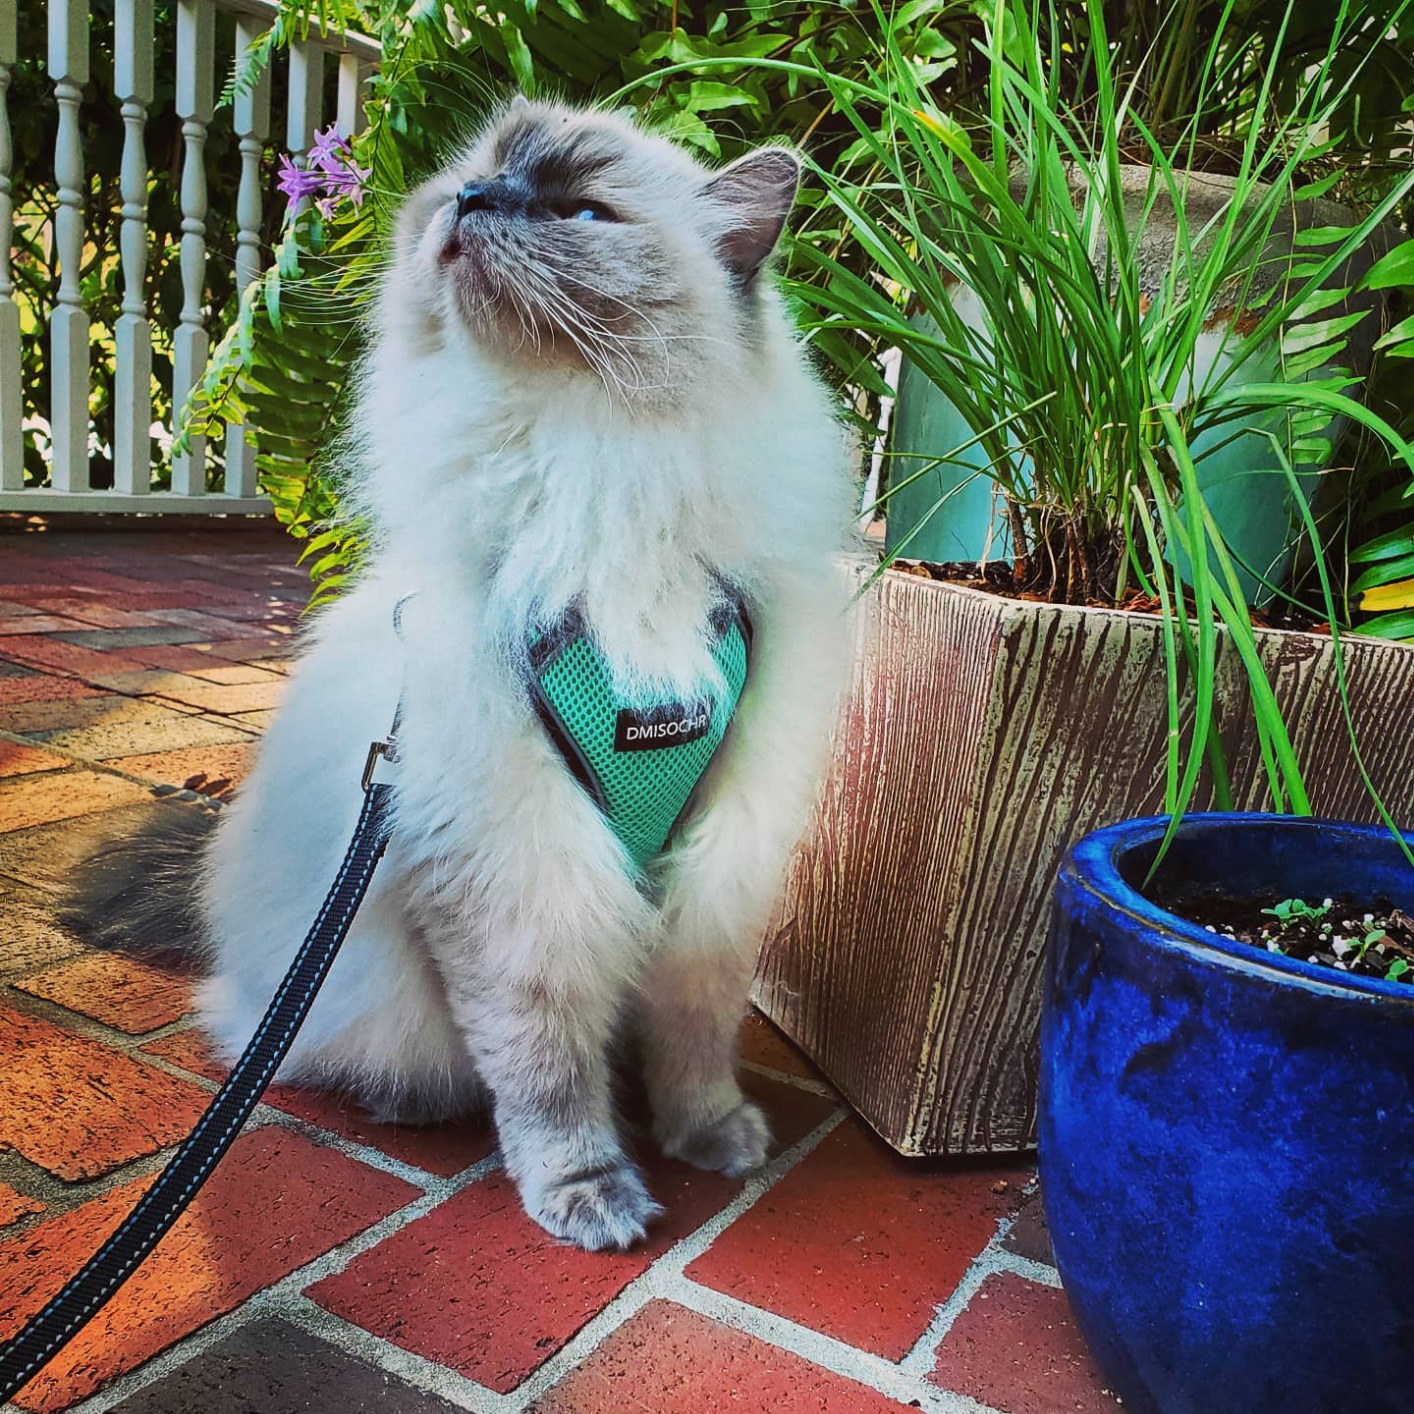 Review photo of cat enjoying the cyan body harness and leash set